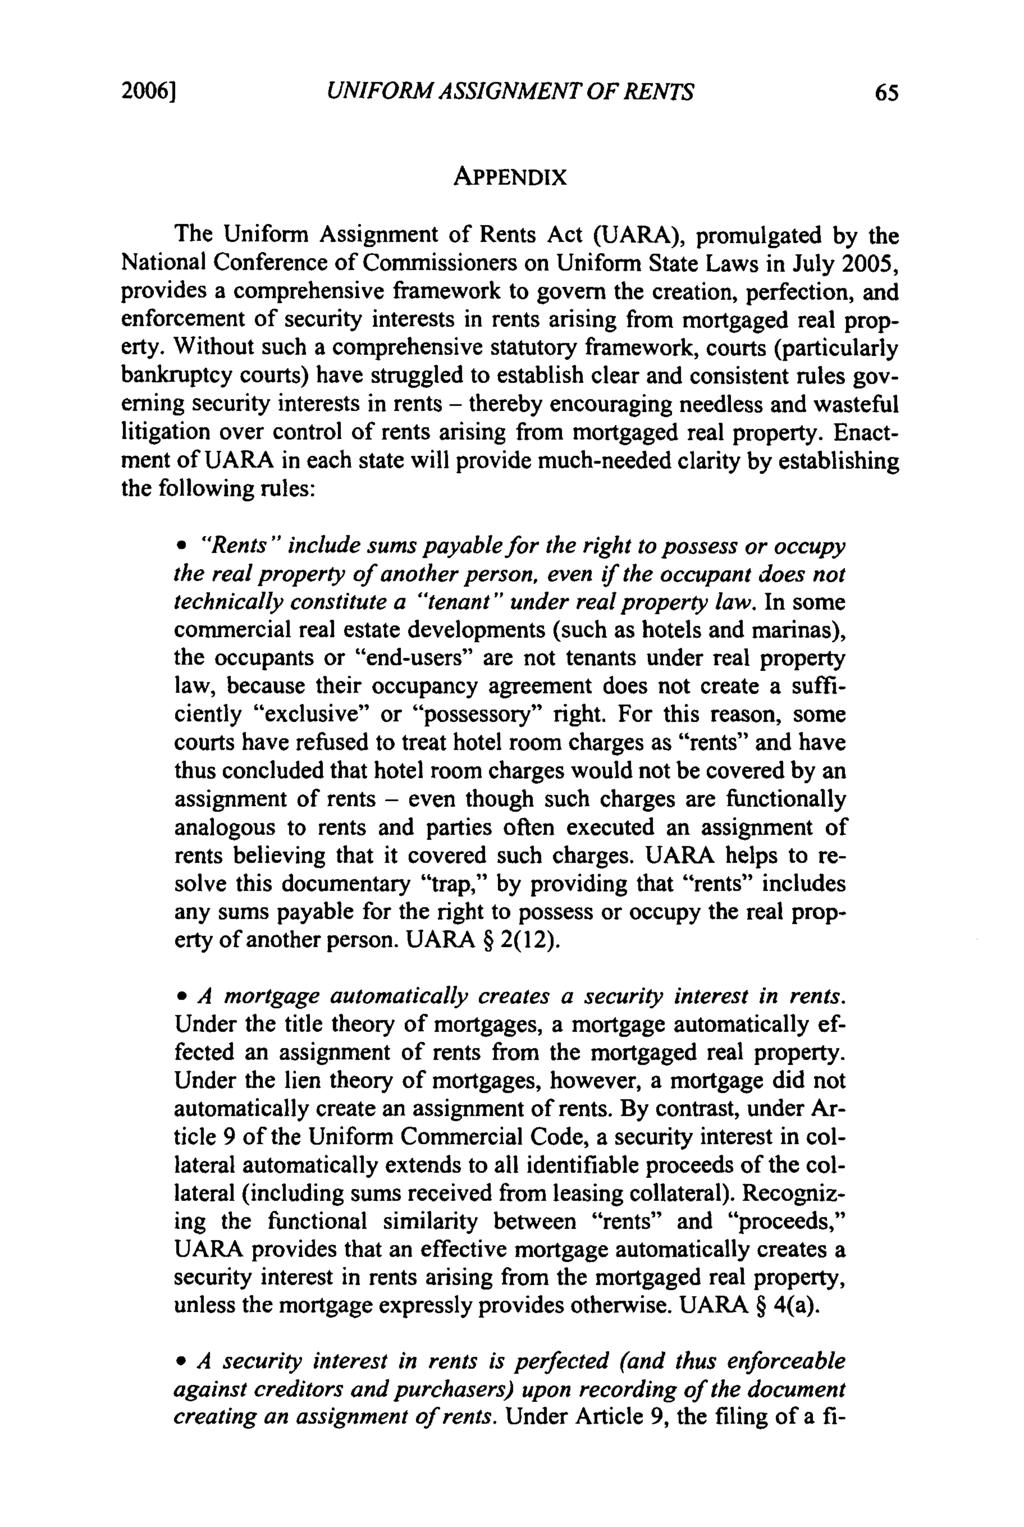 2006] Freyermuth: Freyermuth: Modernizing Security in Rents UNIFORM ASSIGNMENT OF RENTS APPENDIX The Uniform Assignment of Rents Act (UARA), promulgated by the National Conference of Commissioners on